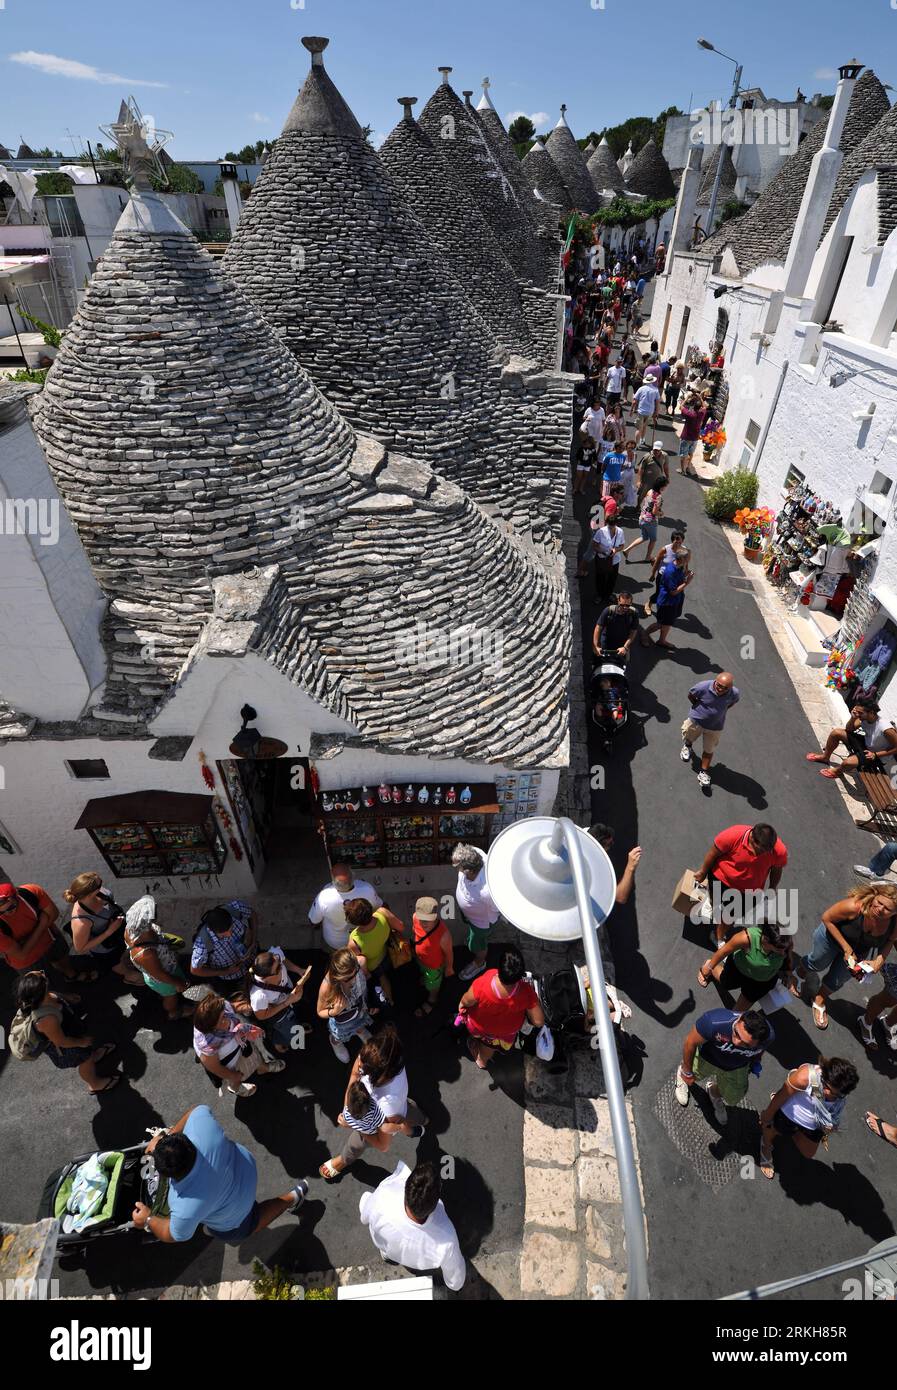 Bildnummer: 55711006  Datum: 10.08.2011  Copyright: imago/Xinhua (110812) -- ALBEROBELLO, Aug. 12, 2011 (Xinhua) -- Tourists visit the Trulli in Alberobello, southern Italy, Aug. 10, 2011. Alberobello, the city of drystone dwellings known as trulli, is an exceptional example of vernacular architecture. The trulli are made of roughly worked limestone boulders collected from neighbouring fields. Characteristically, they feature pyramidal, domed or conical roofs built up of corbelled limestone slabs. UNESCO inscribed the Trulli of Alberobello in the World Heritage List in 1996. (Xinhua/Wang Qingq Stock Photo